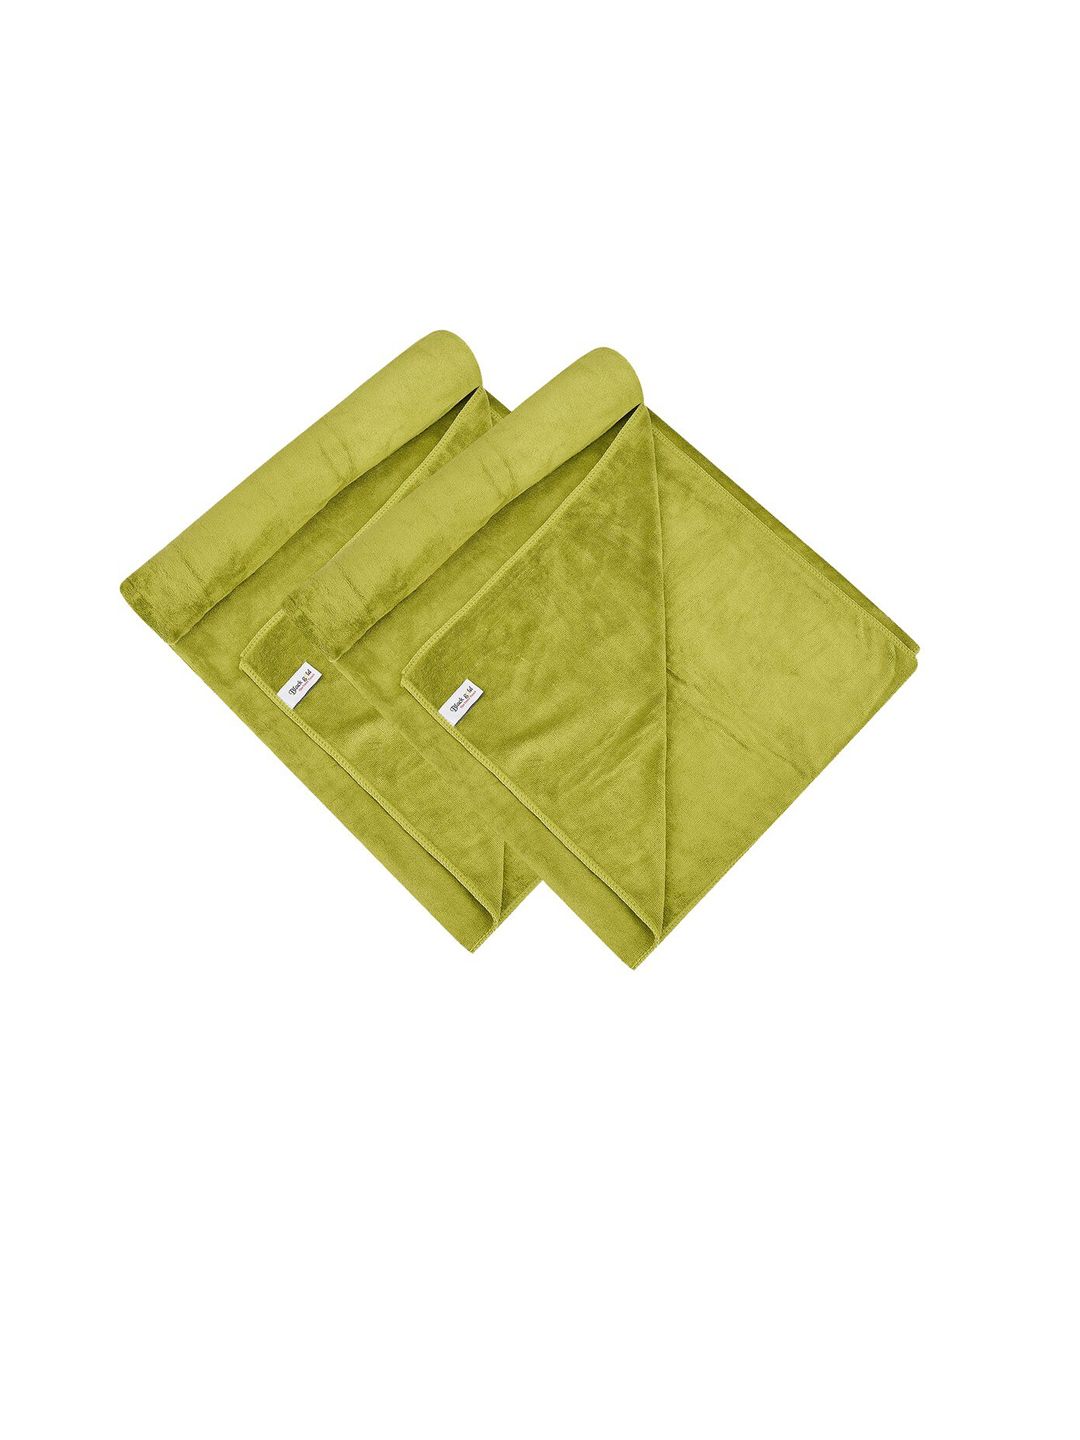 Black Gold Set of 2 Green Solid 400 GSM Bath Towels Price in India